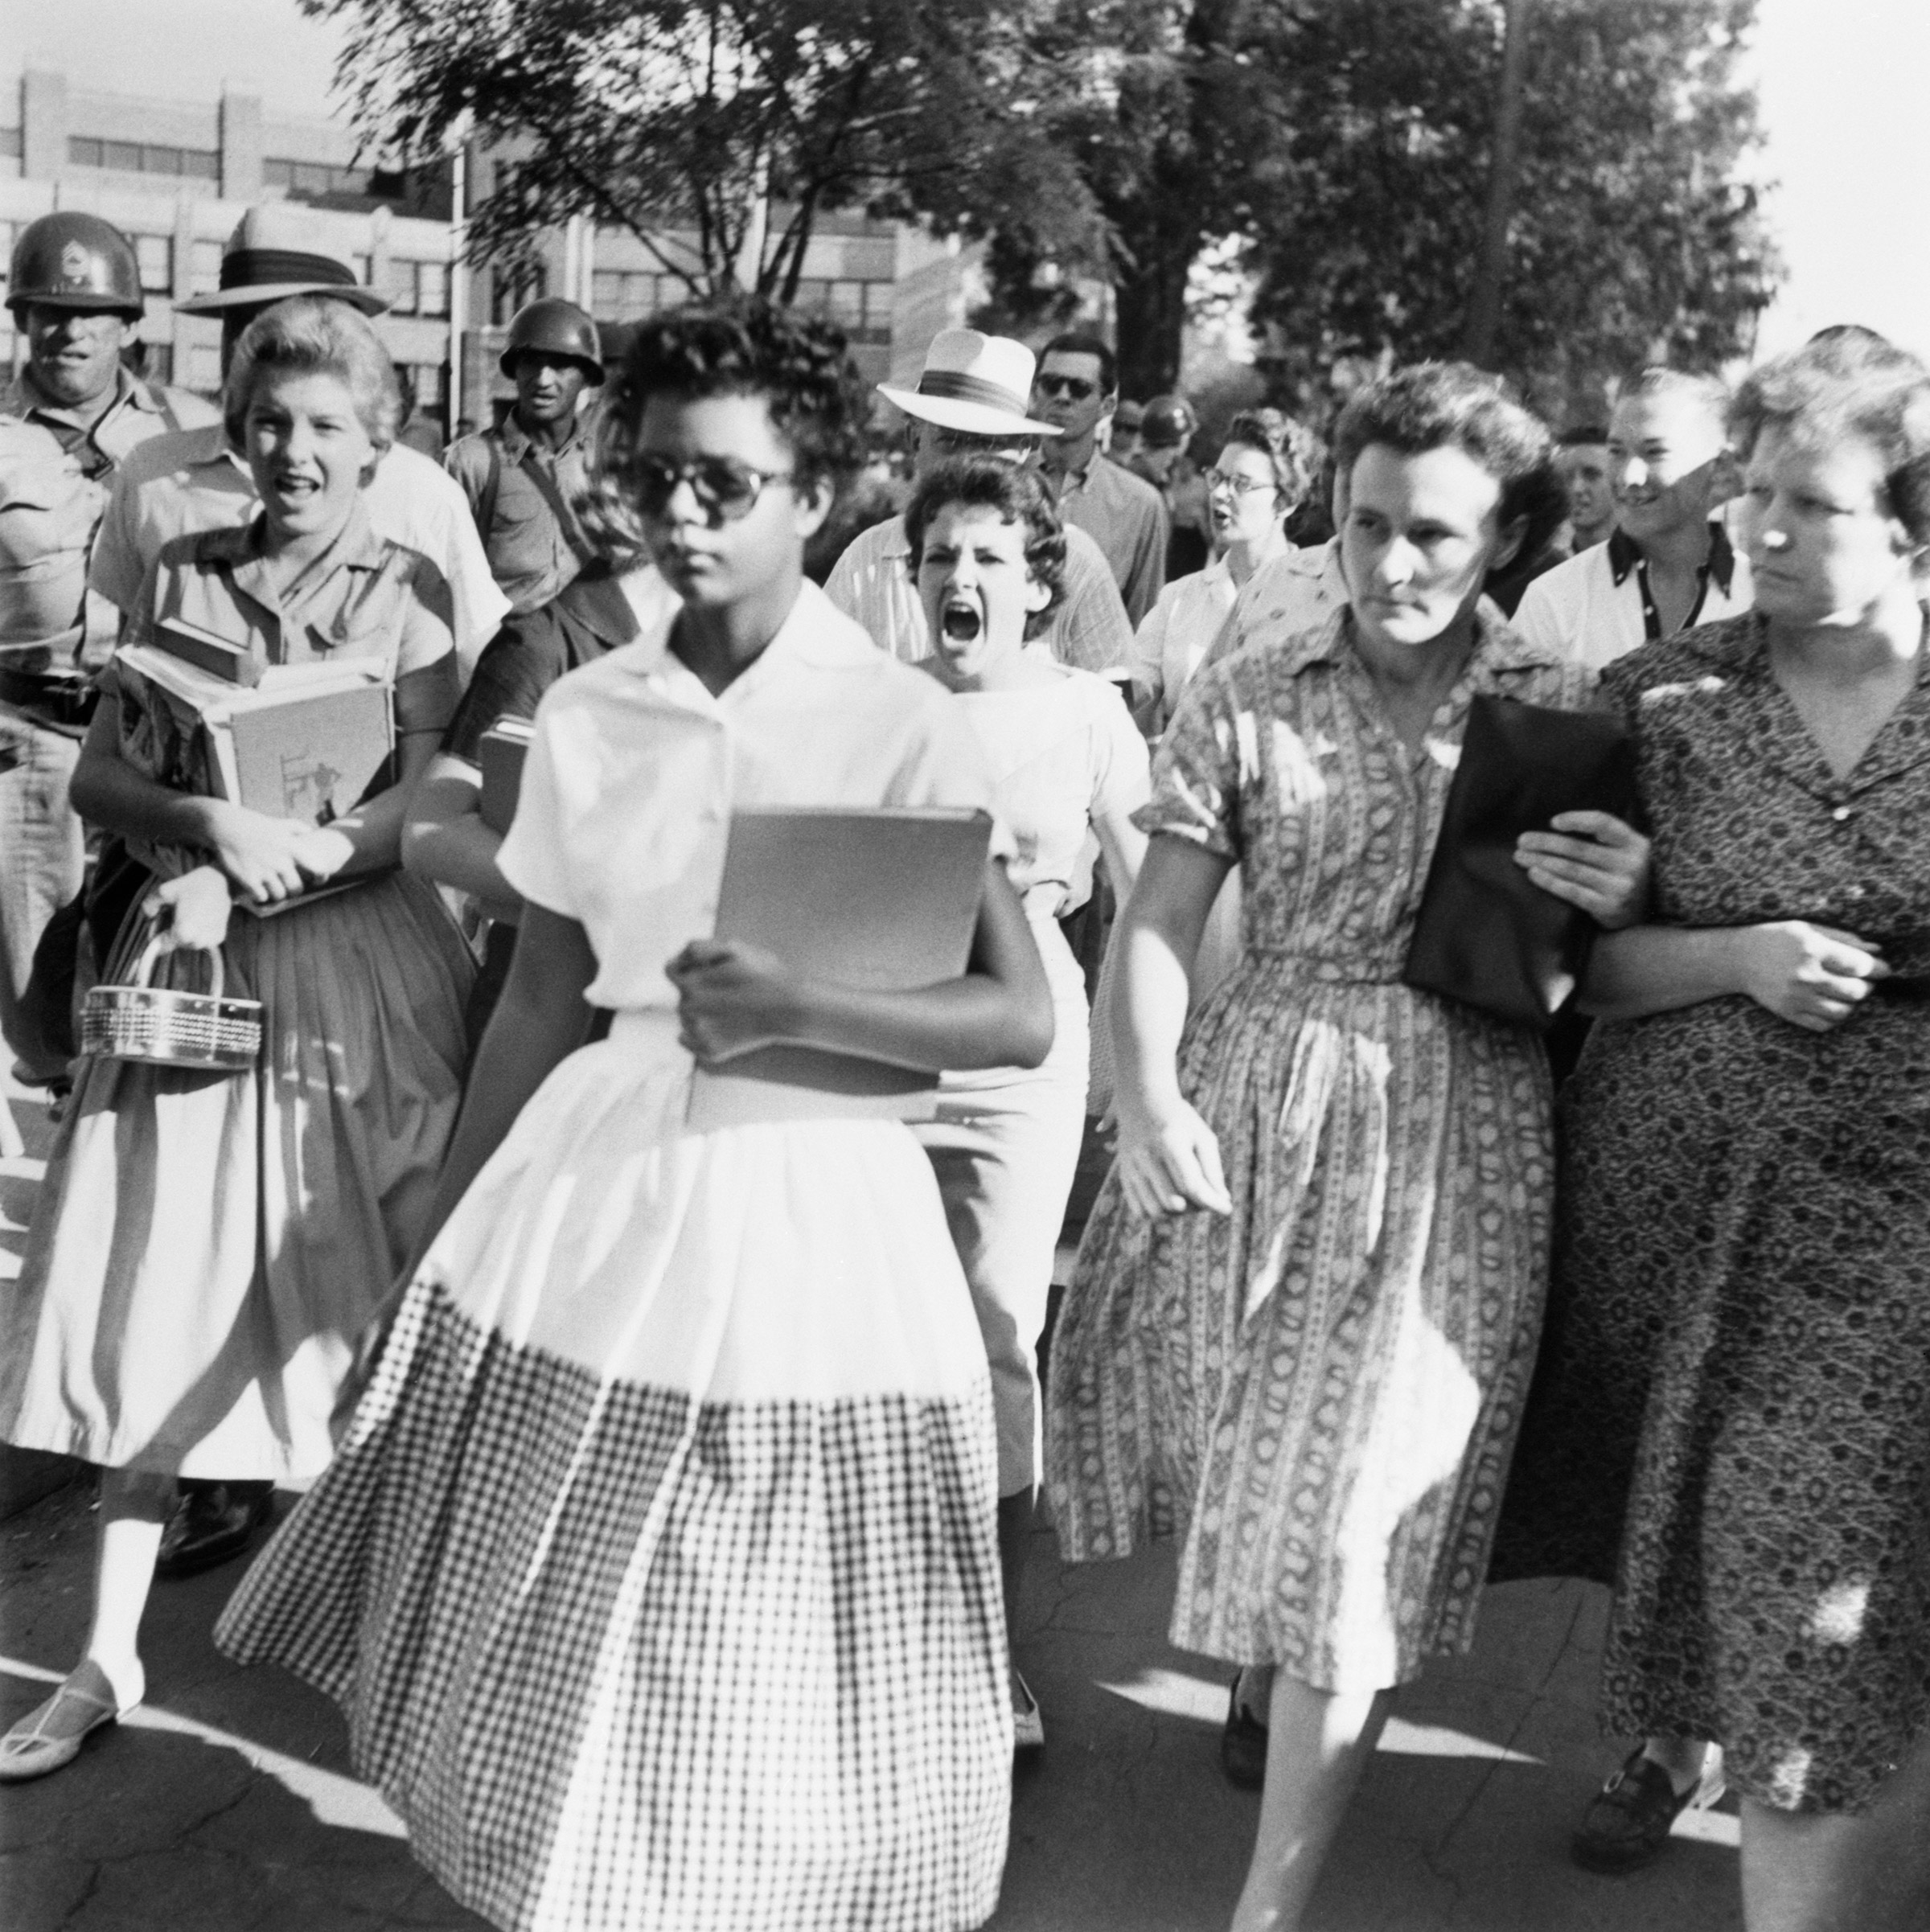 Elizabeth Eckford ignores the screams and stares of fellow students on her first day of school, Sept. 6, 1957. Eckford was one of nine African American students whose integration into Little Rock's Central High School was ordered by a Federal Court following legal action by the National Association for the Advancement of Colored People (NAACP).